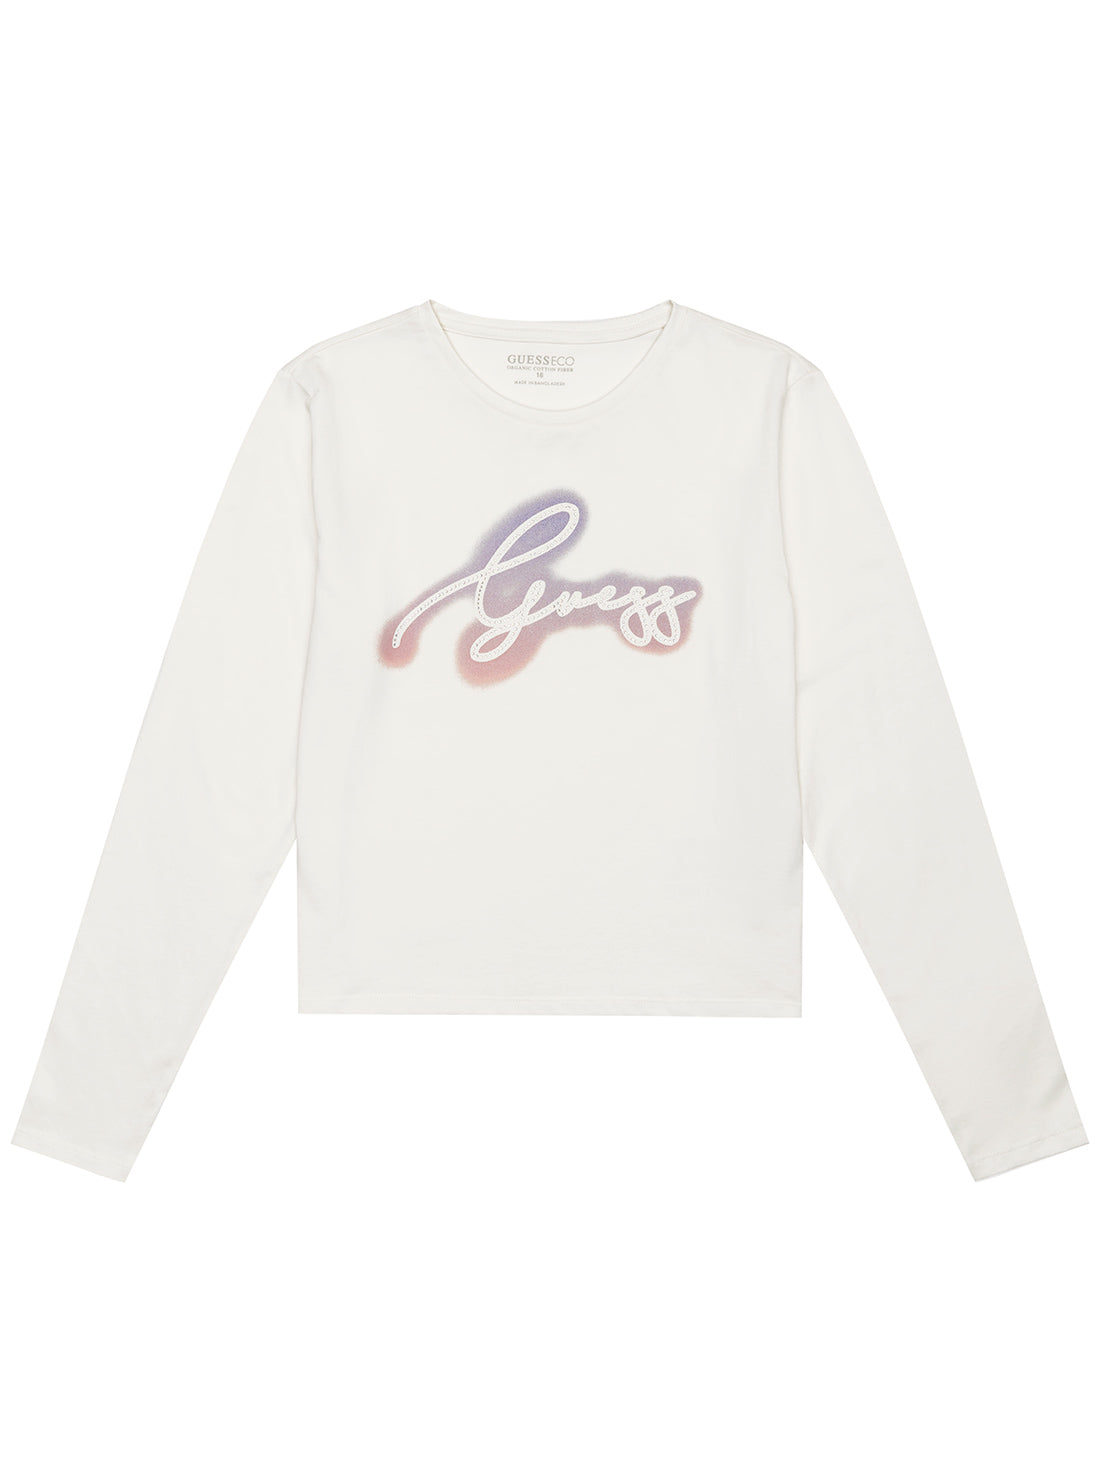 GUESS White Long Sleeve Crop T-Shirt (7-16) front view